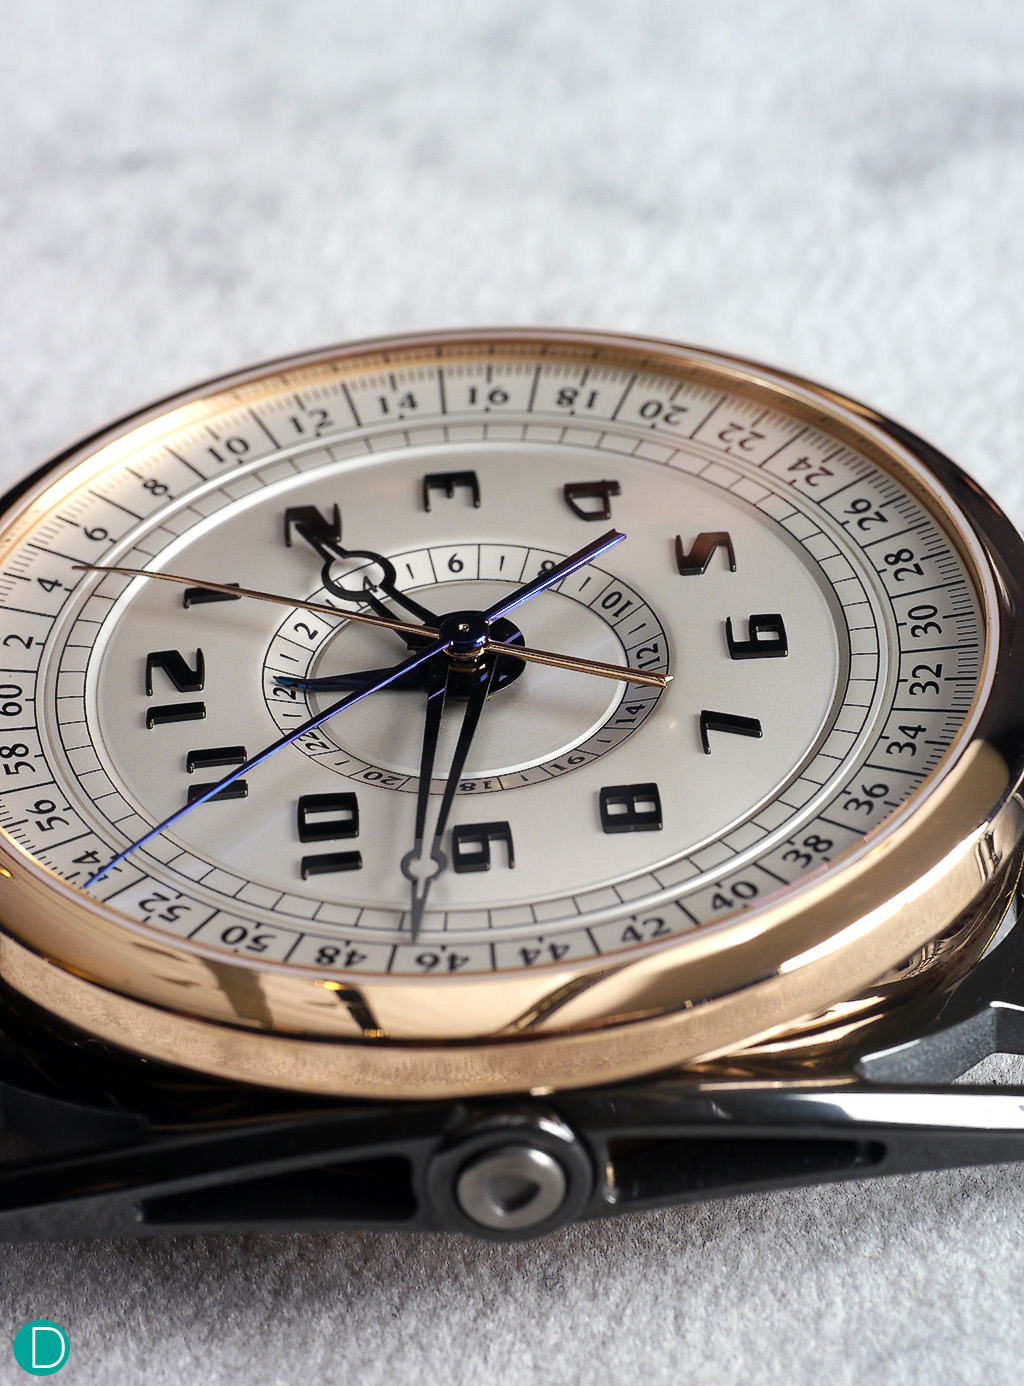 The more aggressively styled  De Bethune DB28 MaxiChrono with articulating lugs.  Note the beauty of the 5 hands, all coaxially mounted from the center of the dial. Note also that the dial is a complicated, multi level,, multi curved surface to maximise legibility. The chronograph measures up to a maximum of 23 hours, 59 mins, 59.9 seconds.